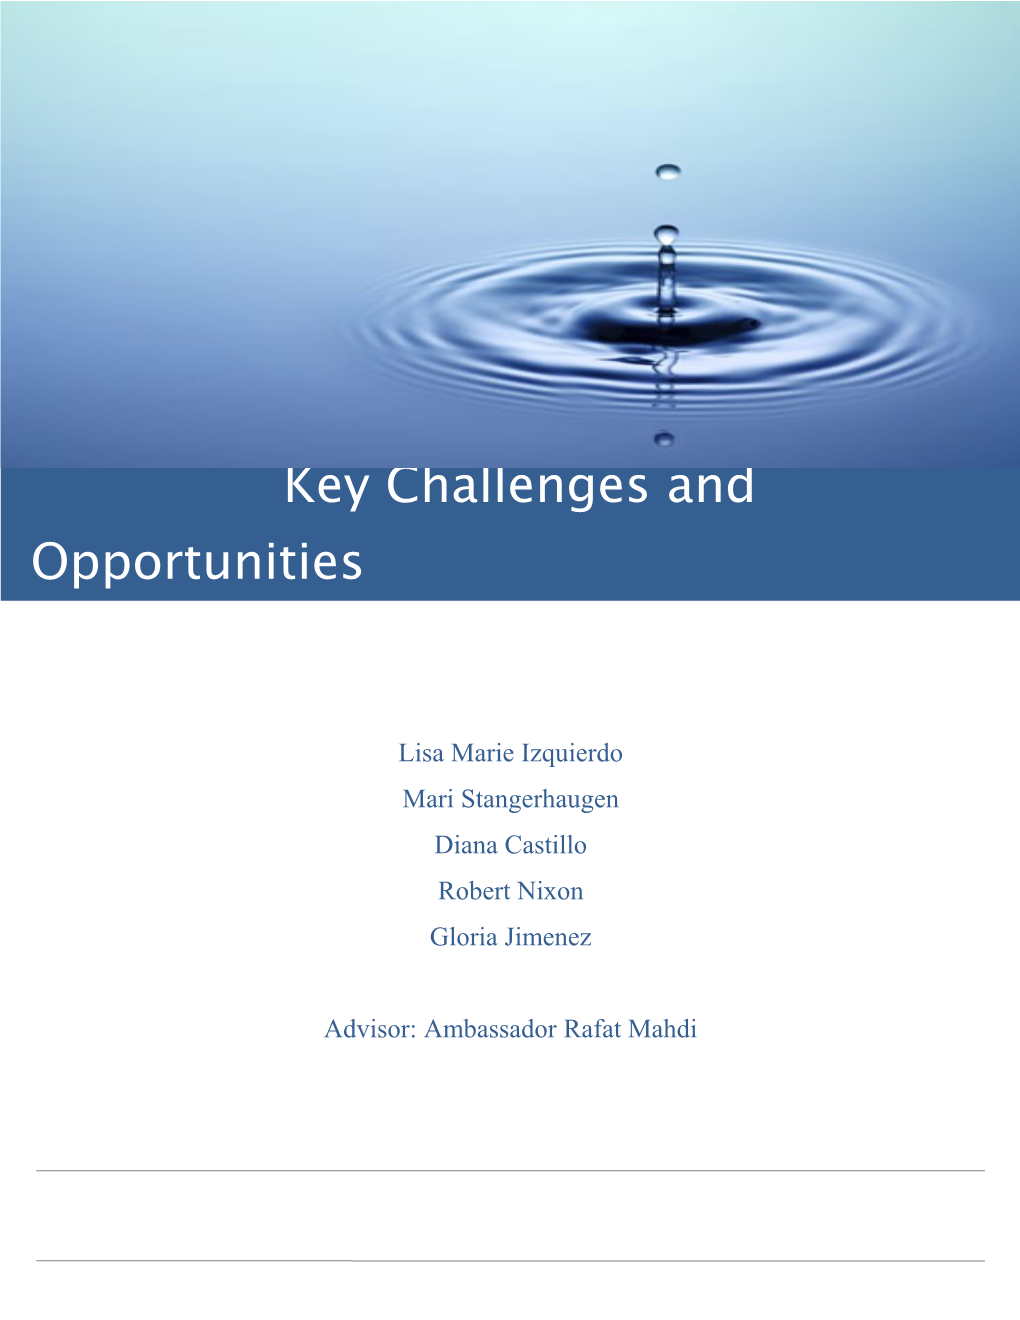 Water Crisis in Central Asia: Key Challenges and Opportunities